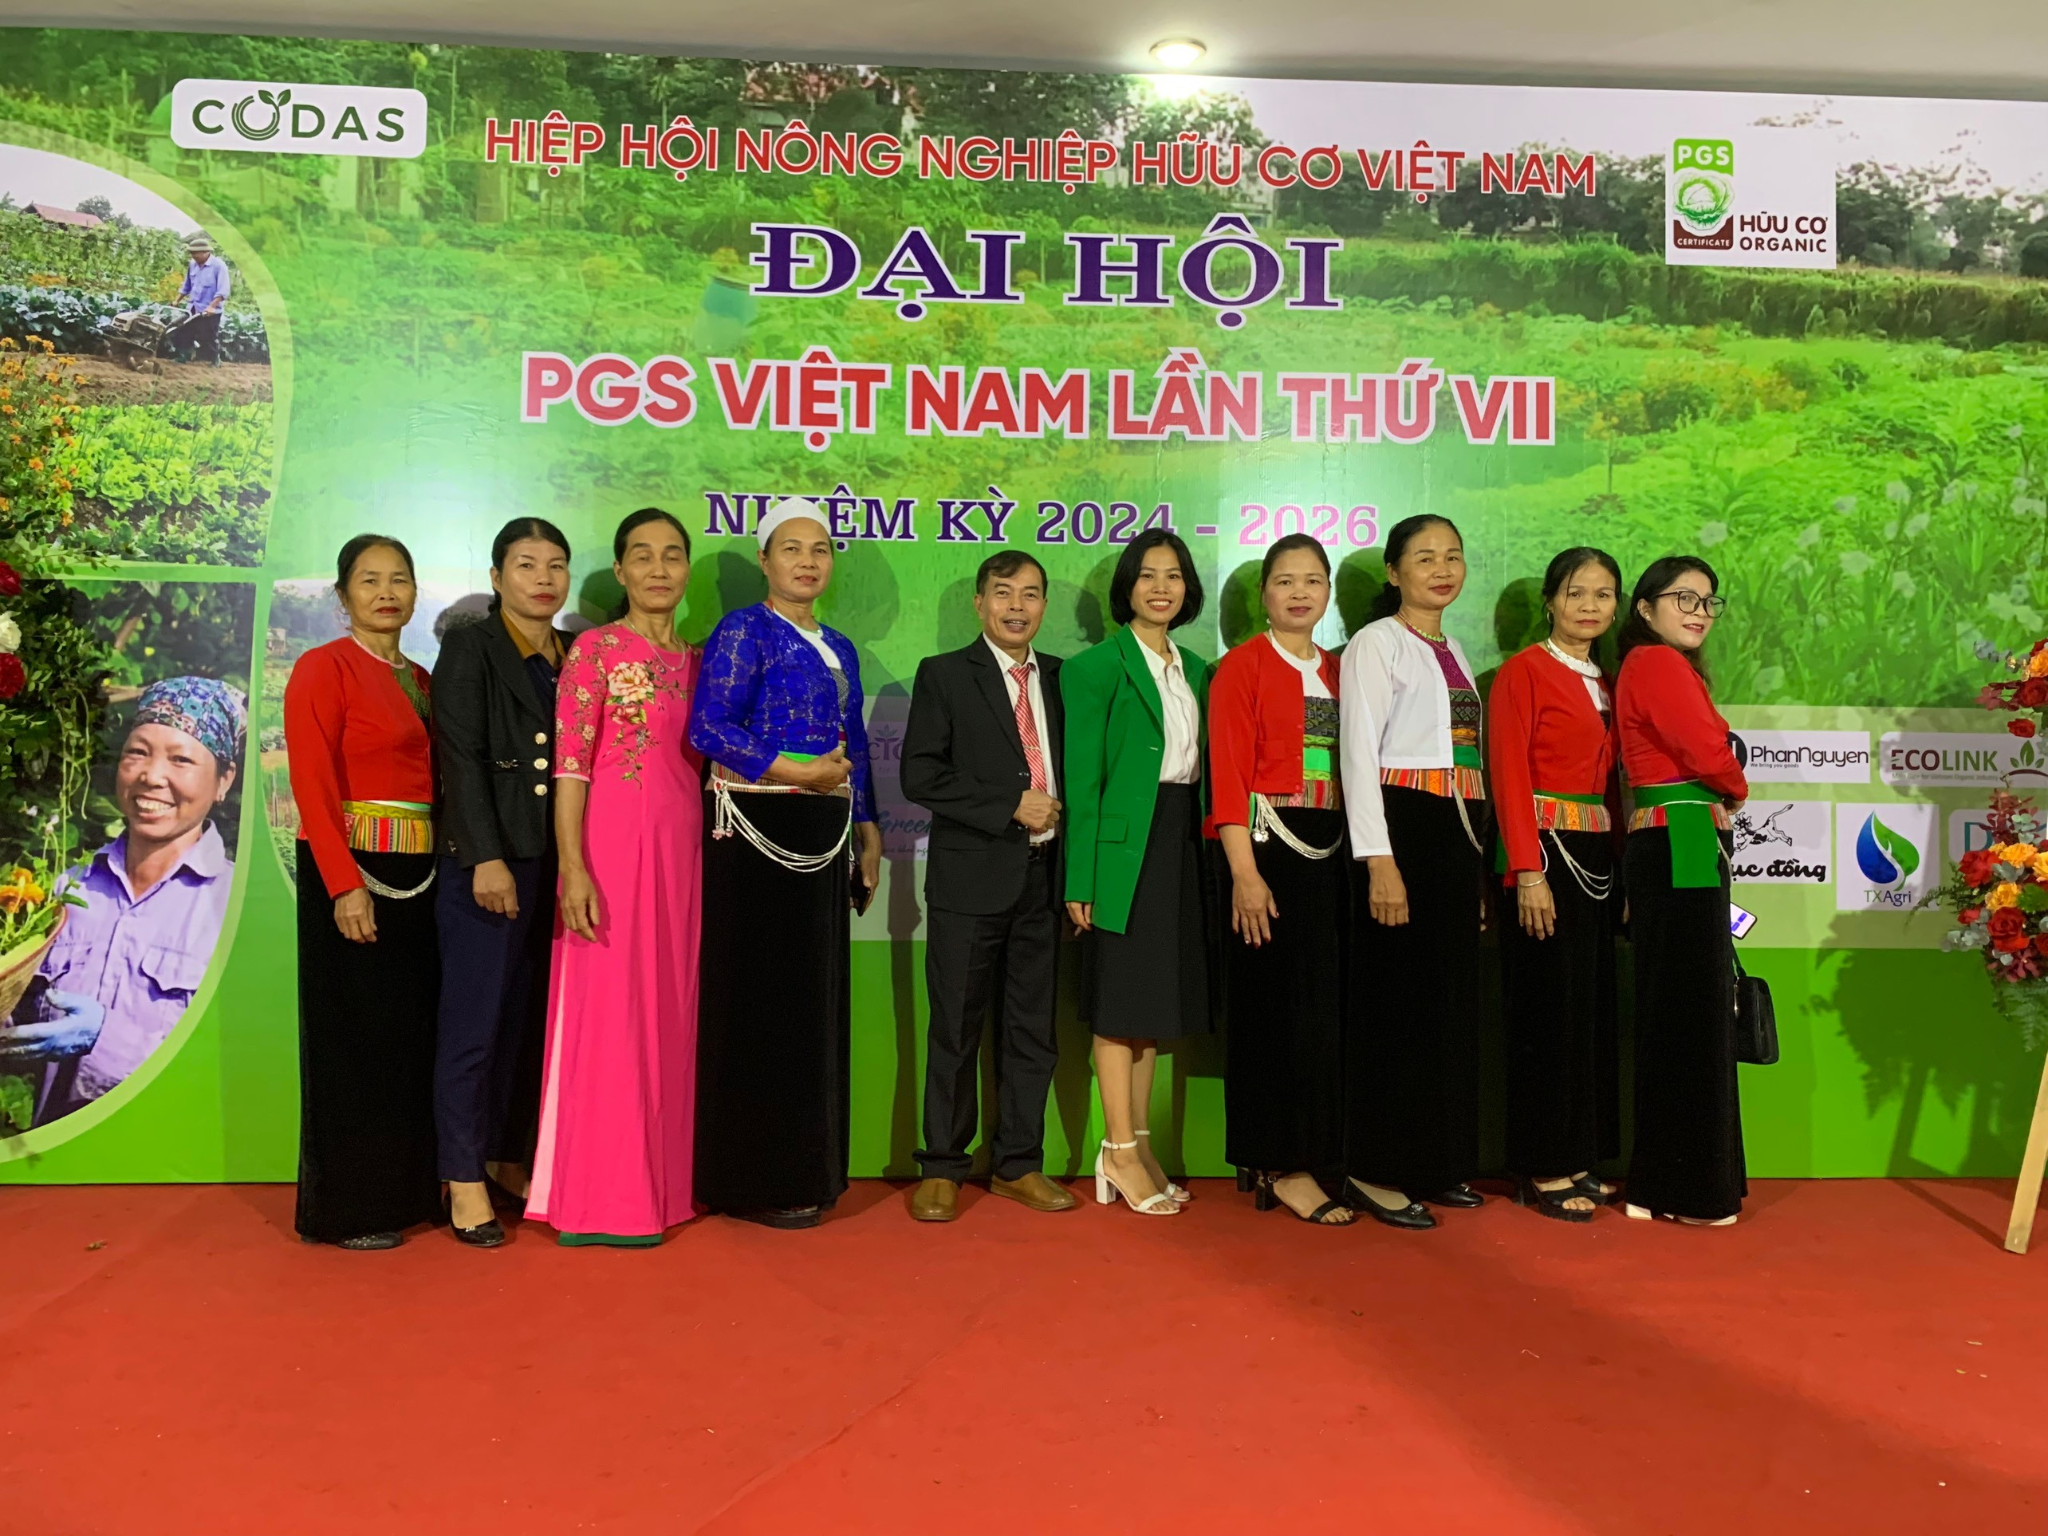 ALiSEA Representative congratulated (Mr. Nguyen Xuan Khoi, the second from the right)